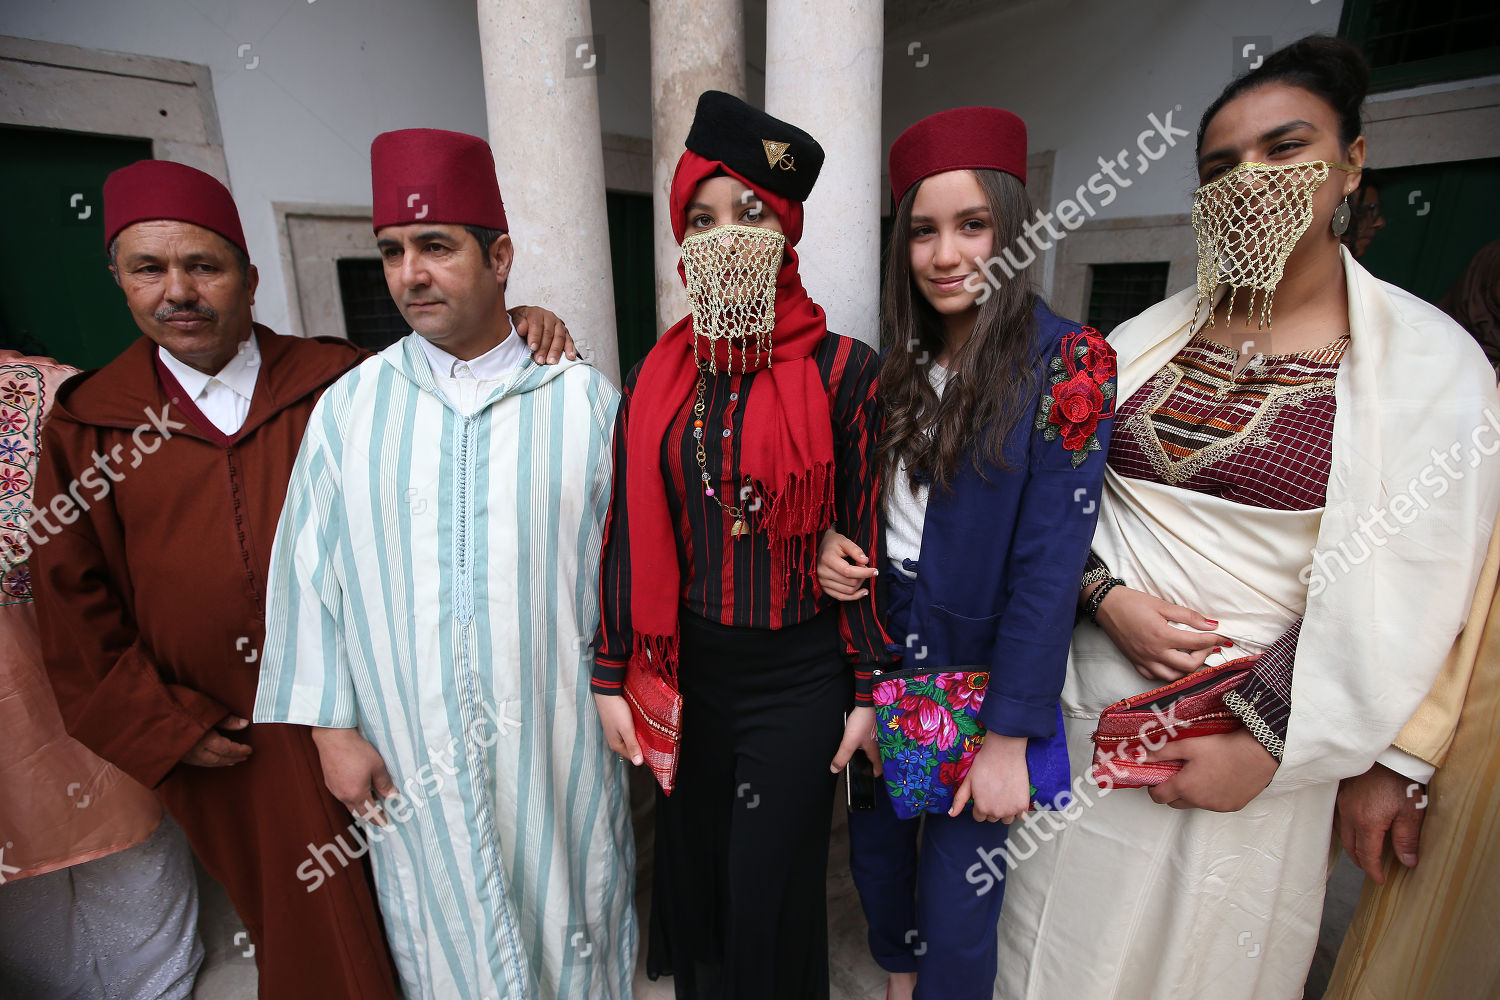 Tunisians Wearing Traditional Clothing Pose Photo During Editorial Stock Photo Stock Image Shutterstock